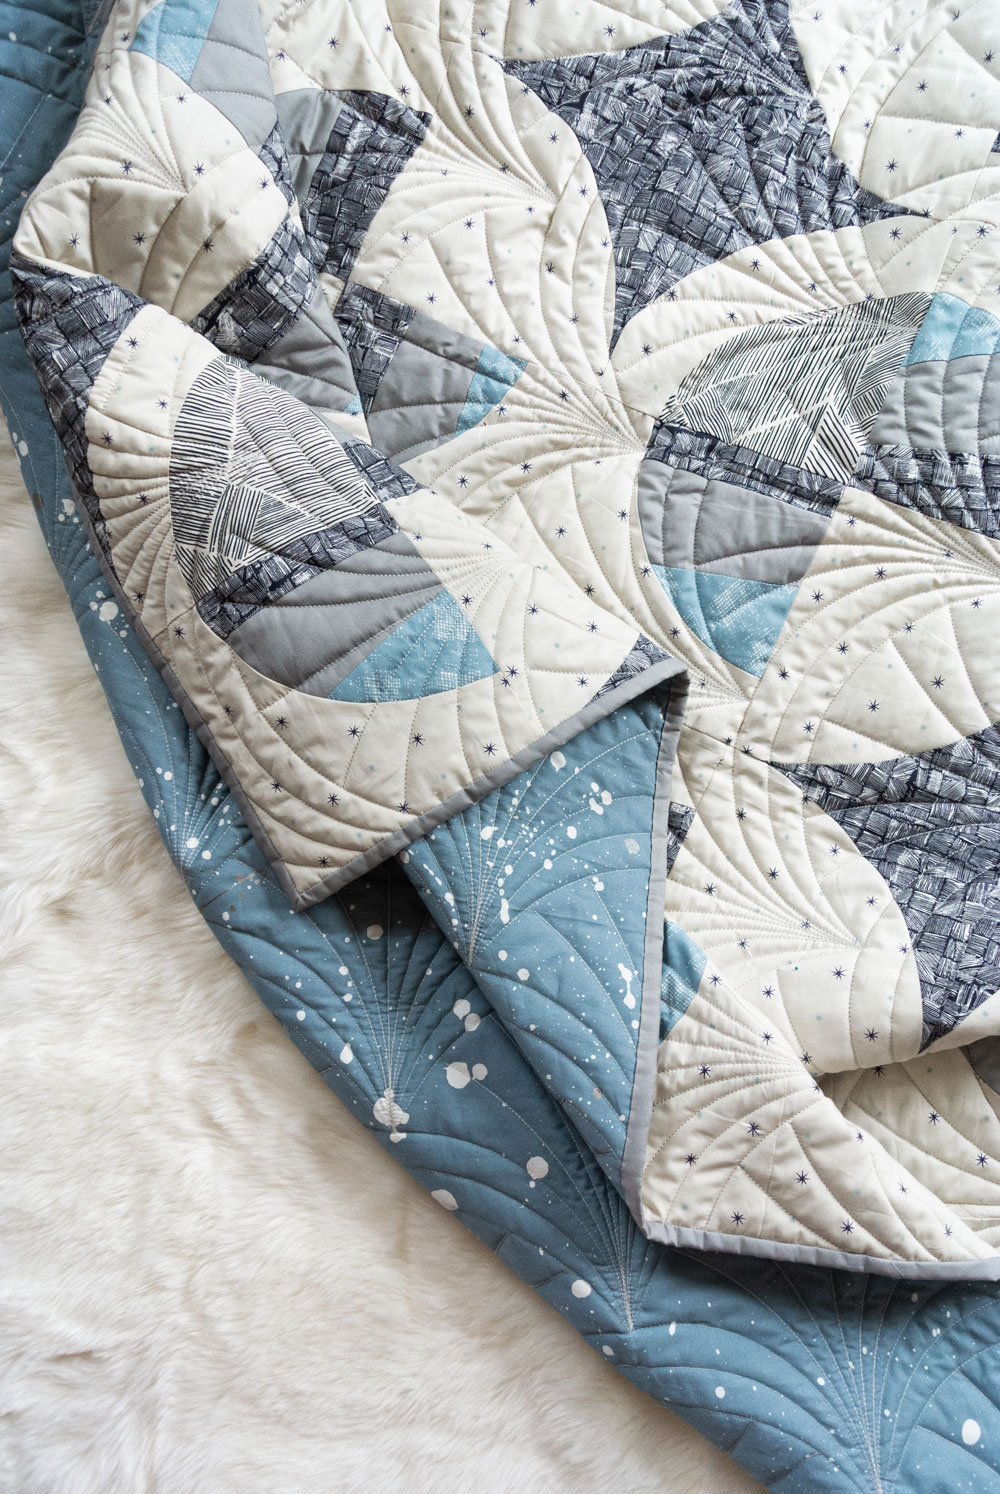 This Great Gatsby inspired Modern Fans quilt kit uses icy blues, grays and metallic silver fabric to bring elegance and pizzazz to a cozy quilt. suzyquilts.com #quiltpattern #quilt #modernquilt